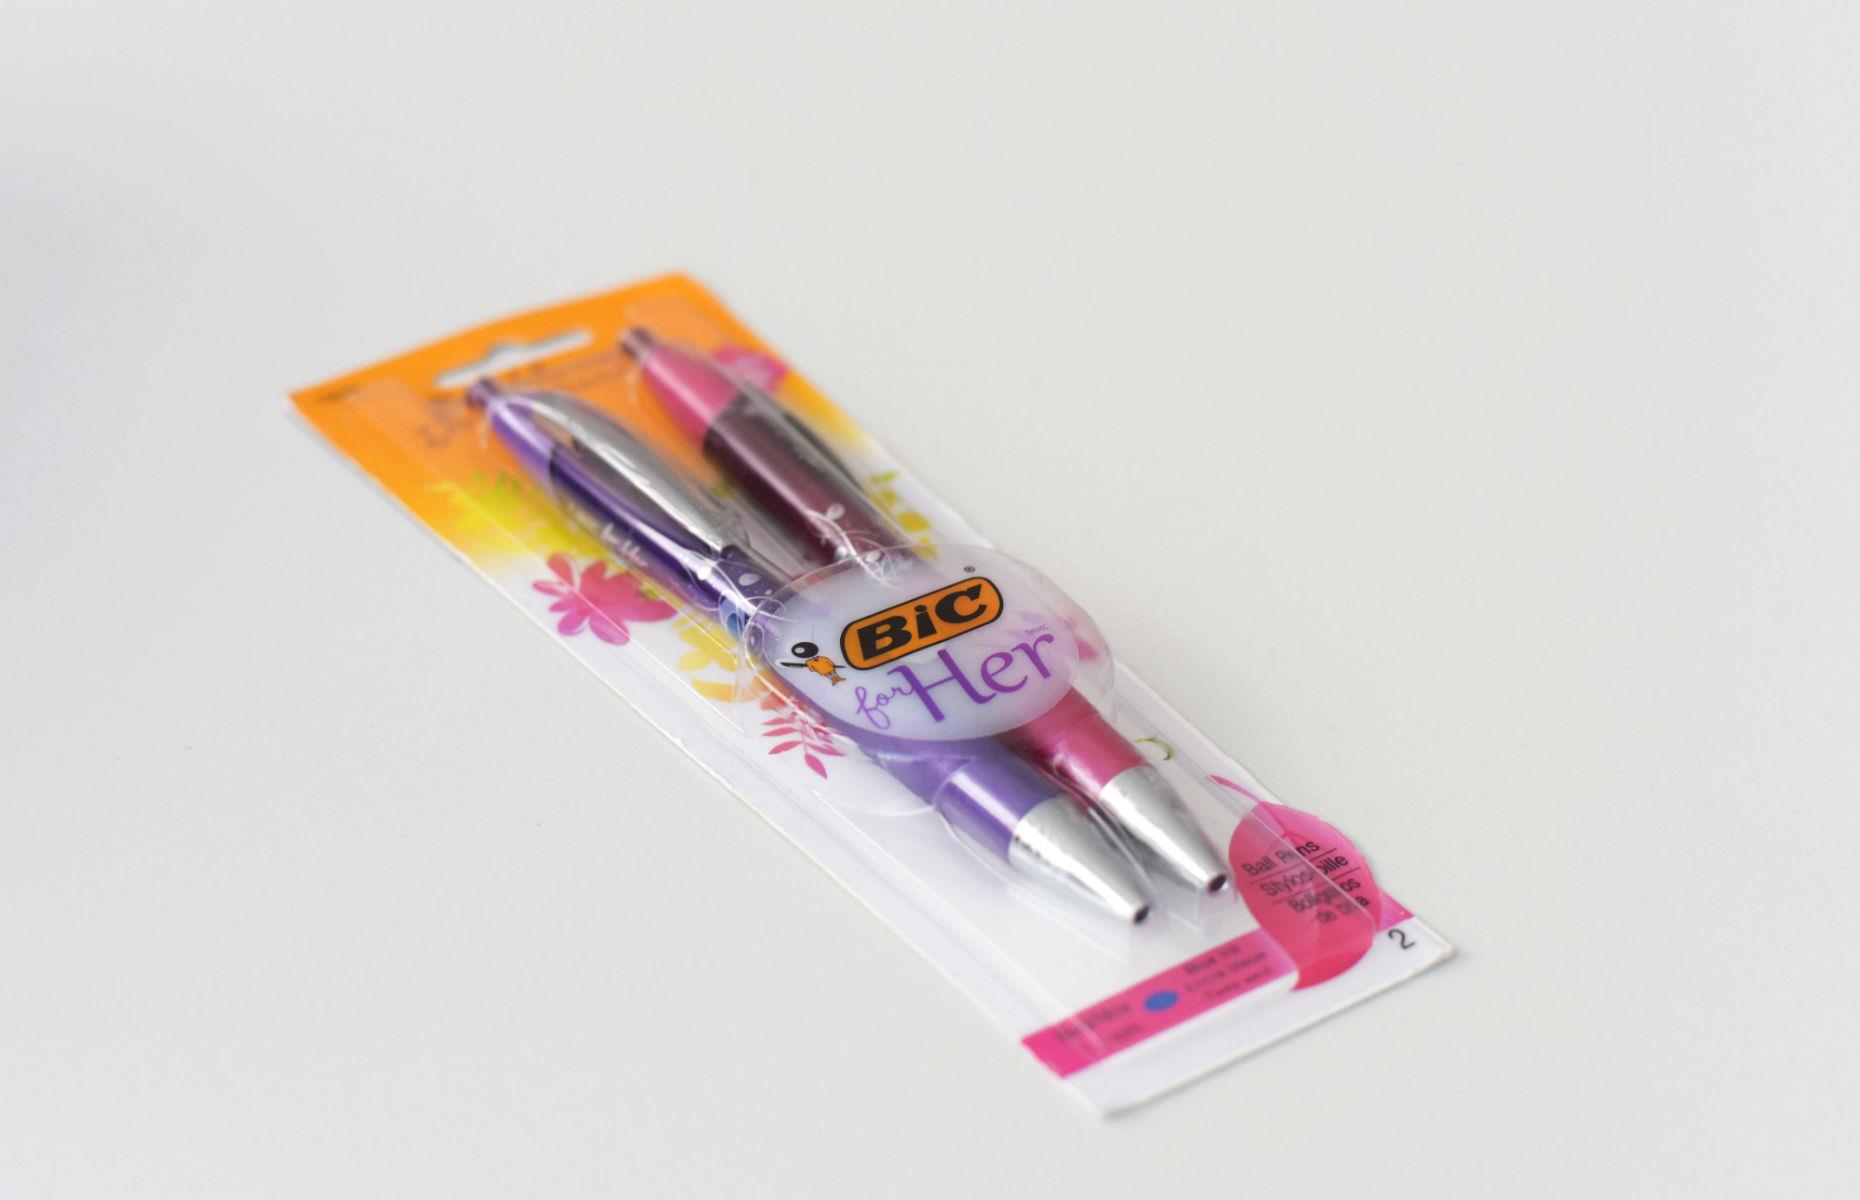 BIC’s “for Her” pens 